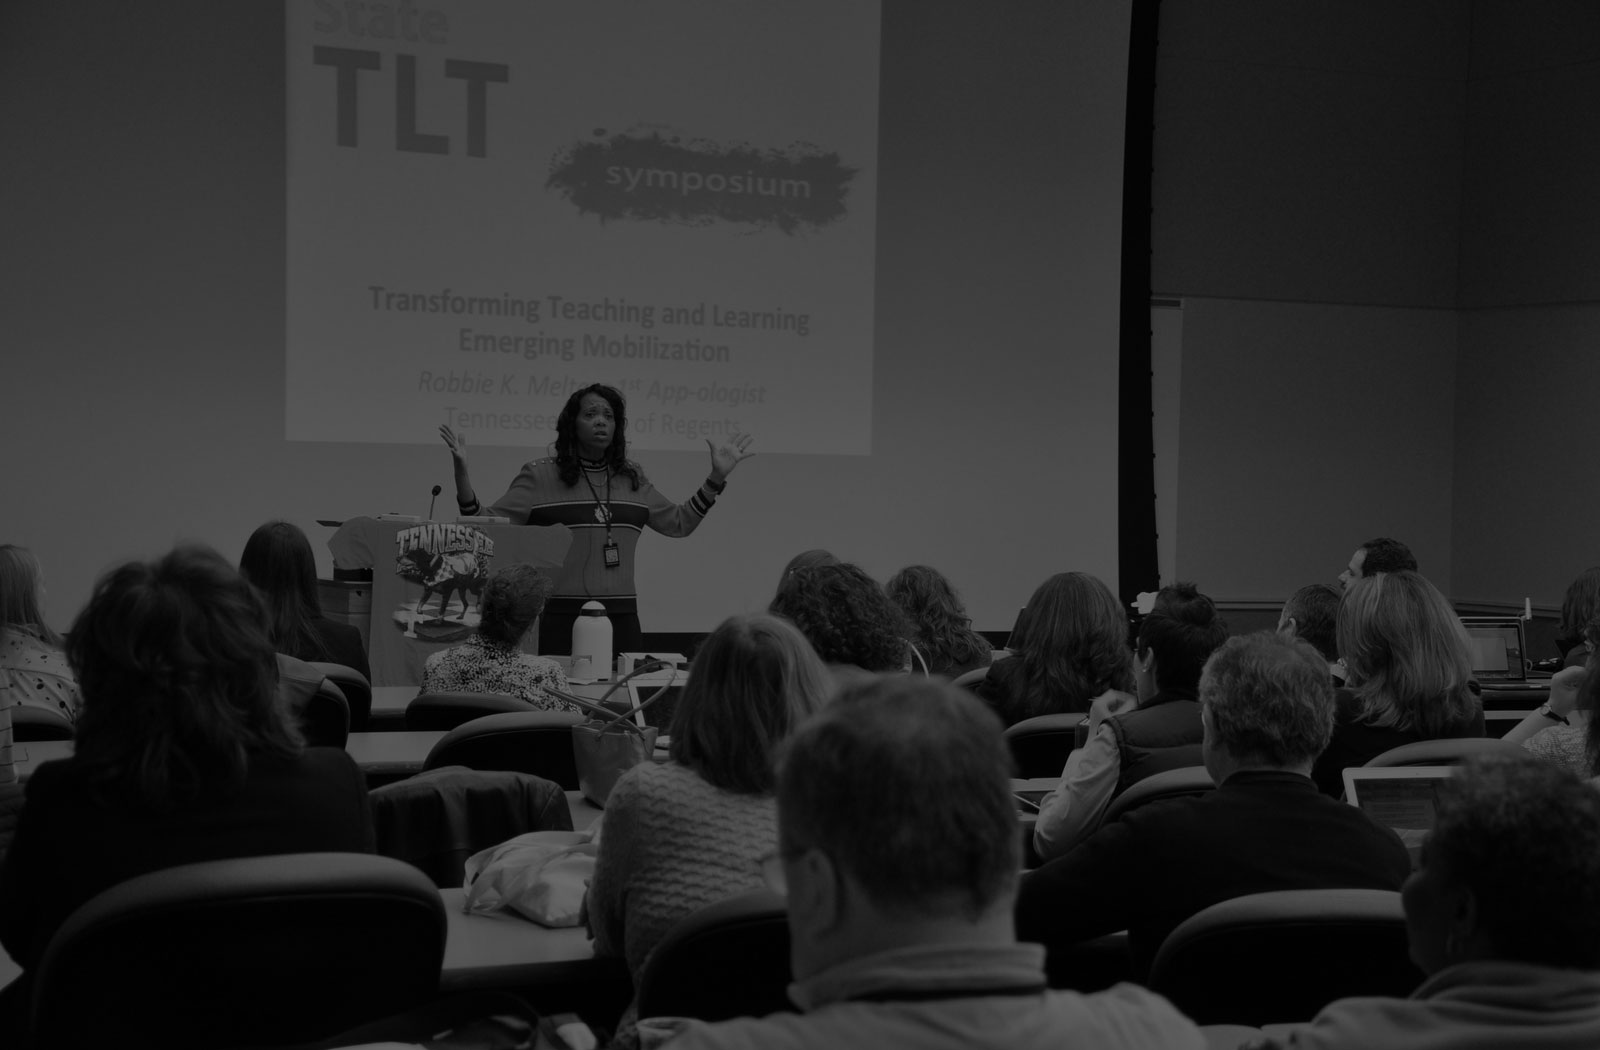 Save the date for the 2015 TLT Symposium